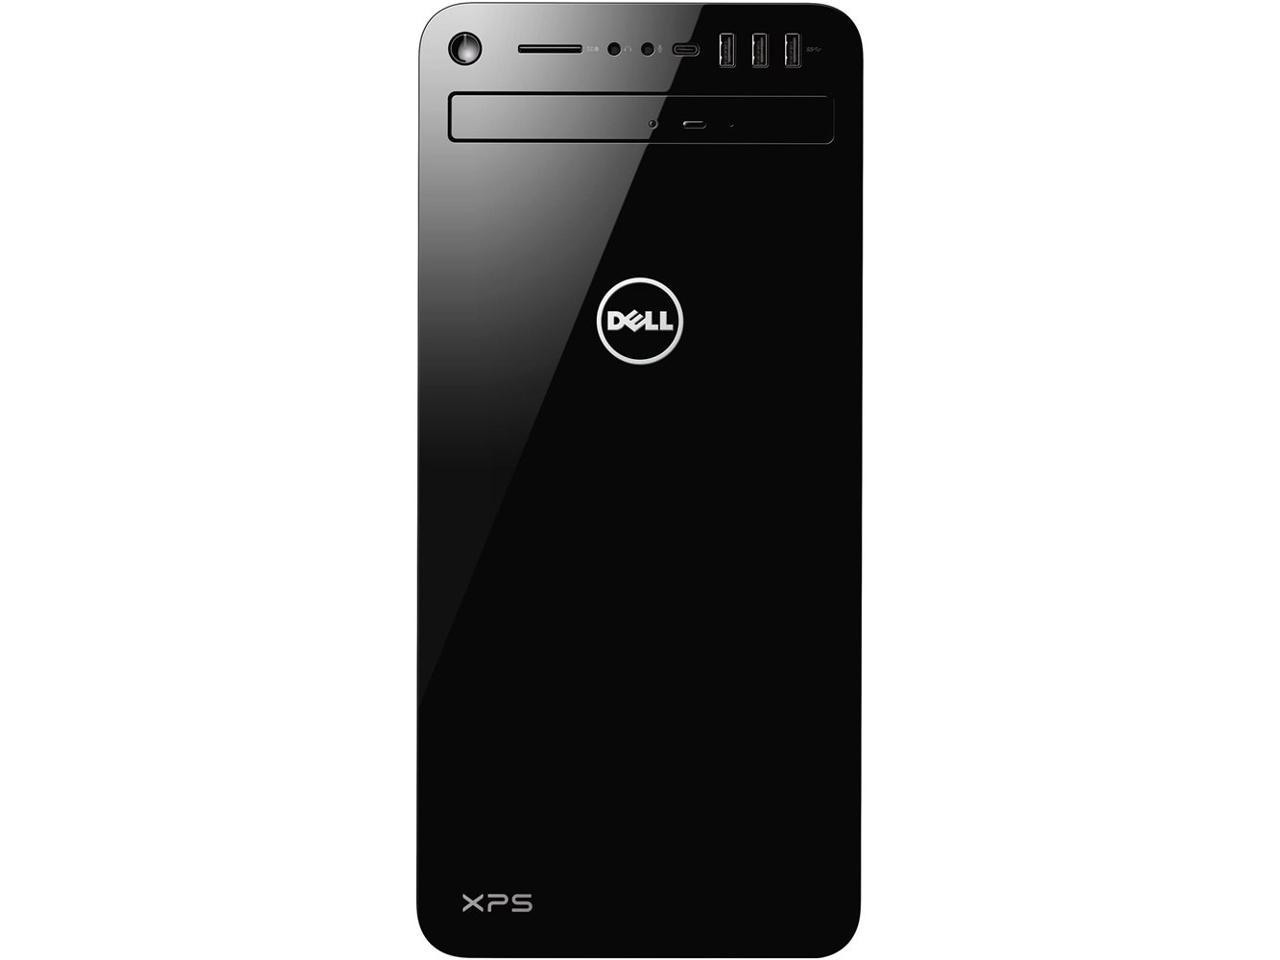 2019 Best Desktop Deal Overpowered DELL XPS 8930 i5-8400 8GB 1TB W10H